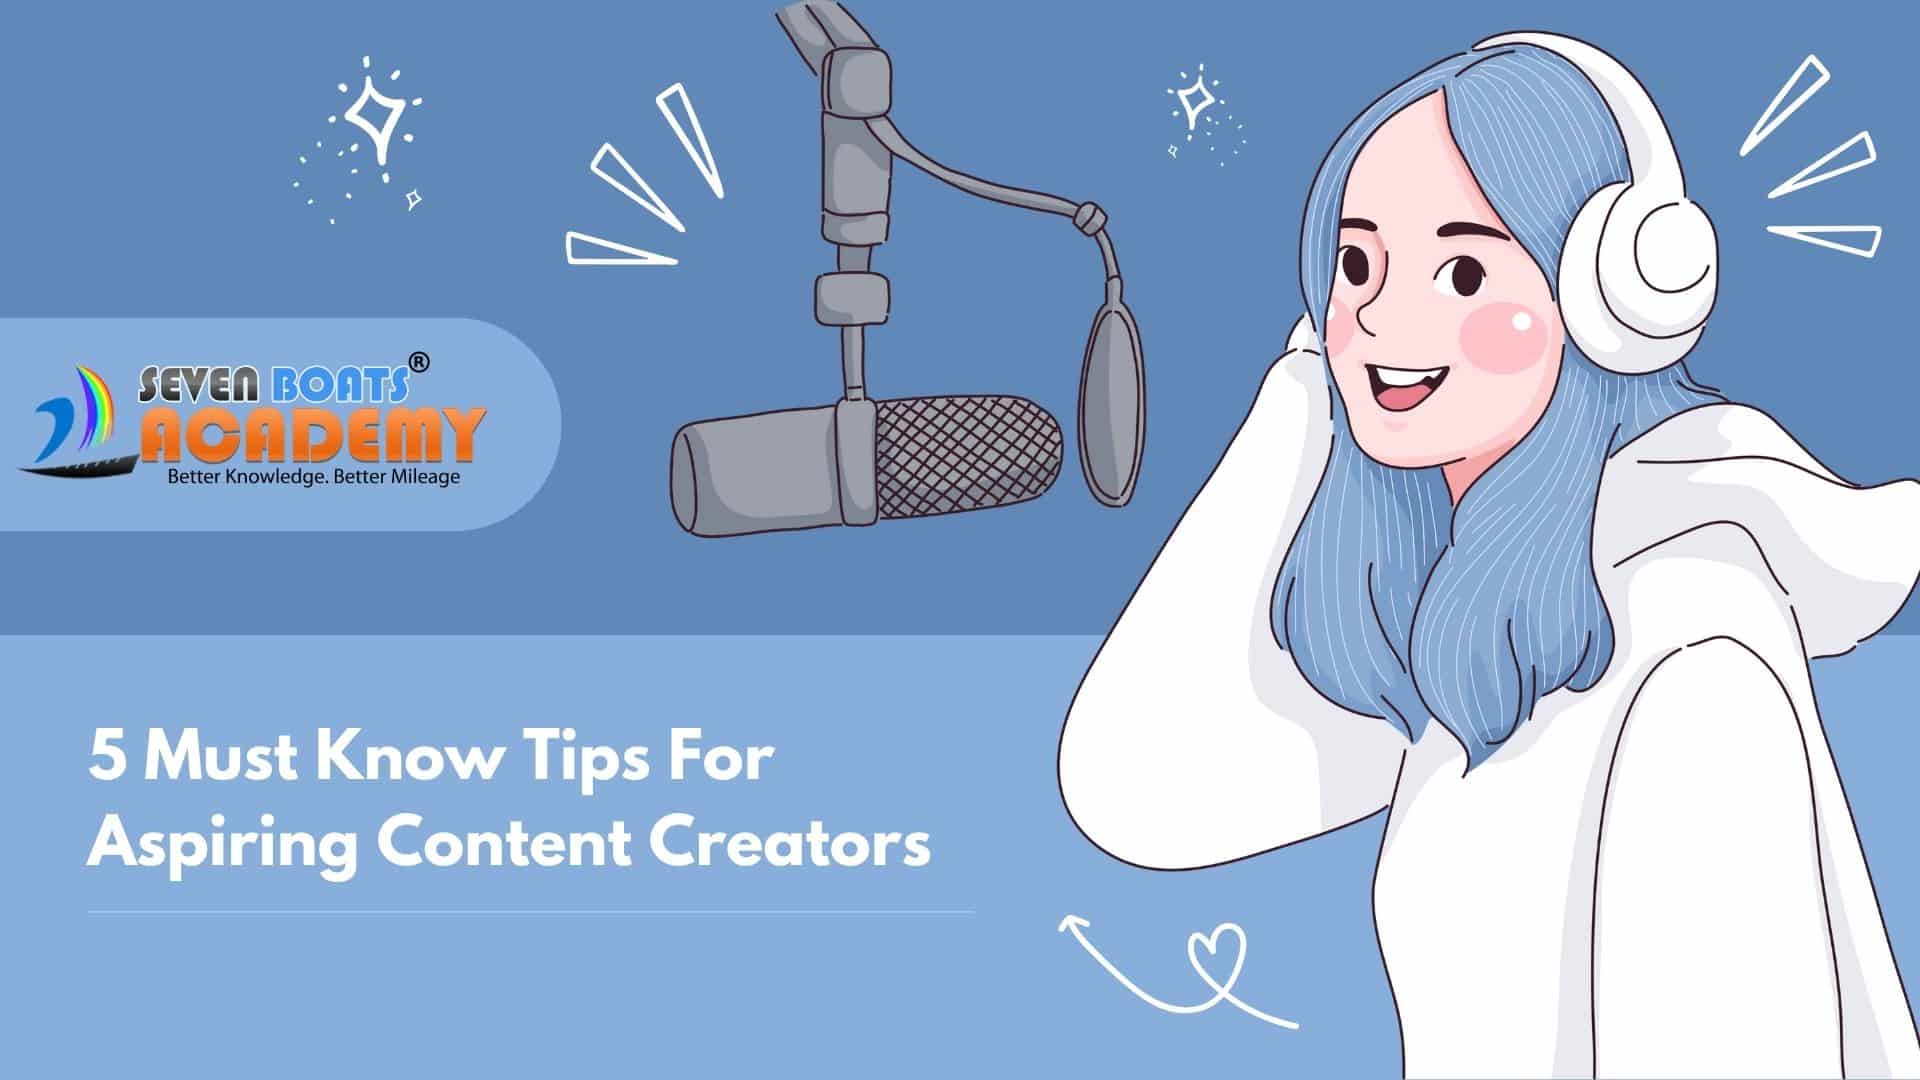 5 Must Know Tips For Aspiring Content Creators